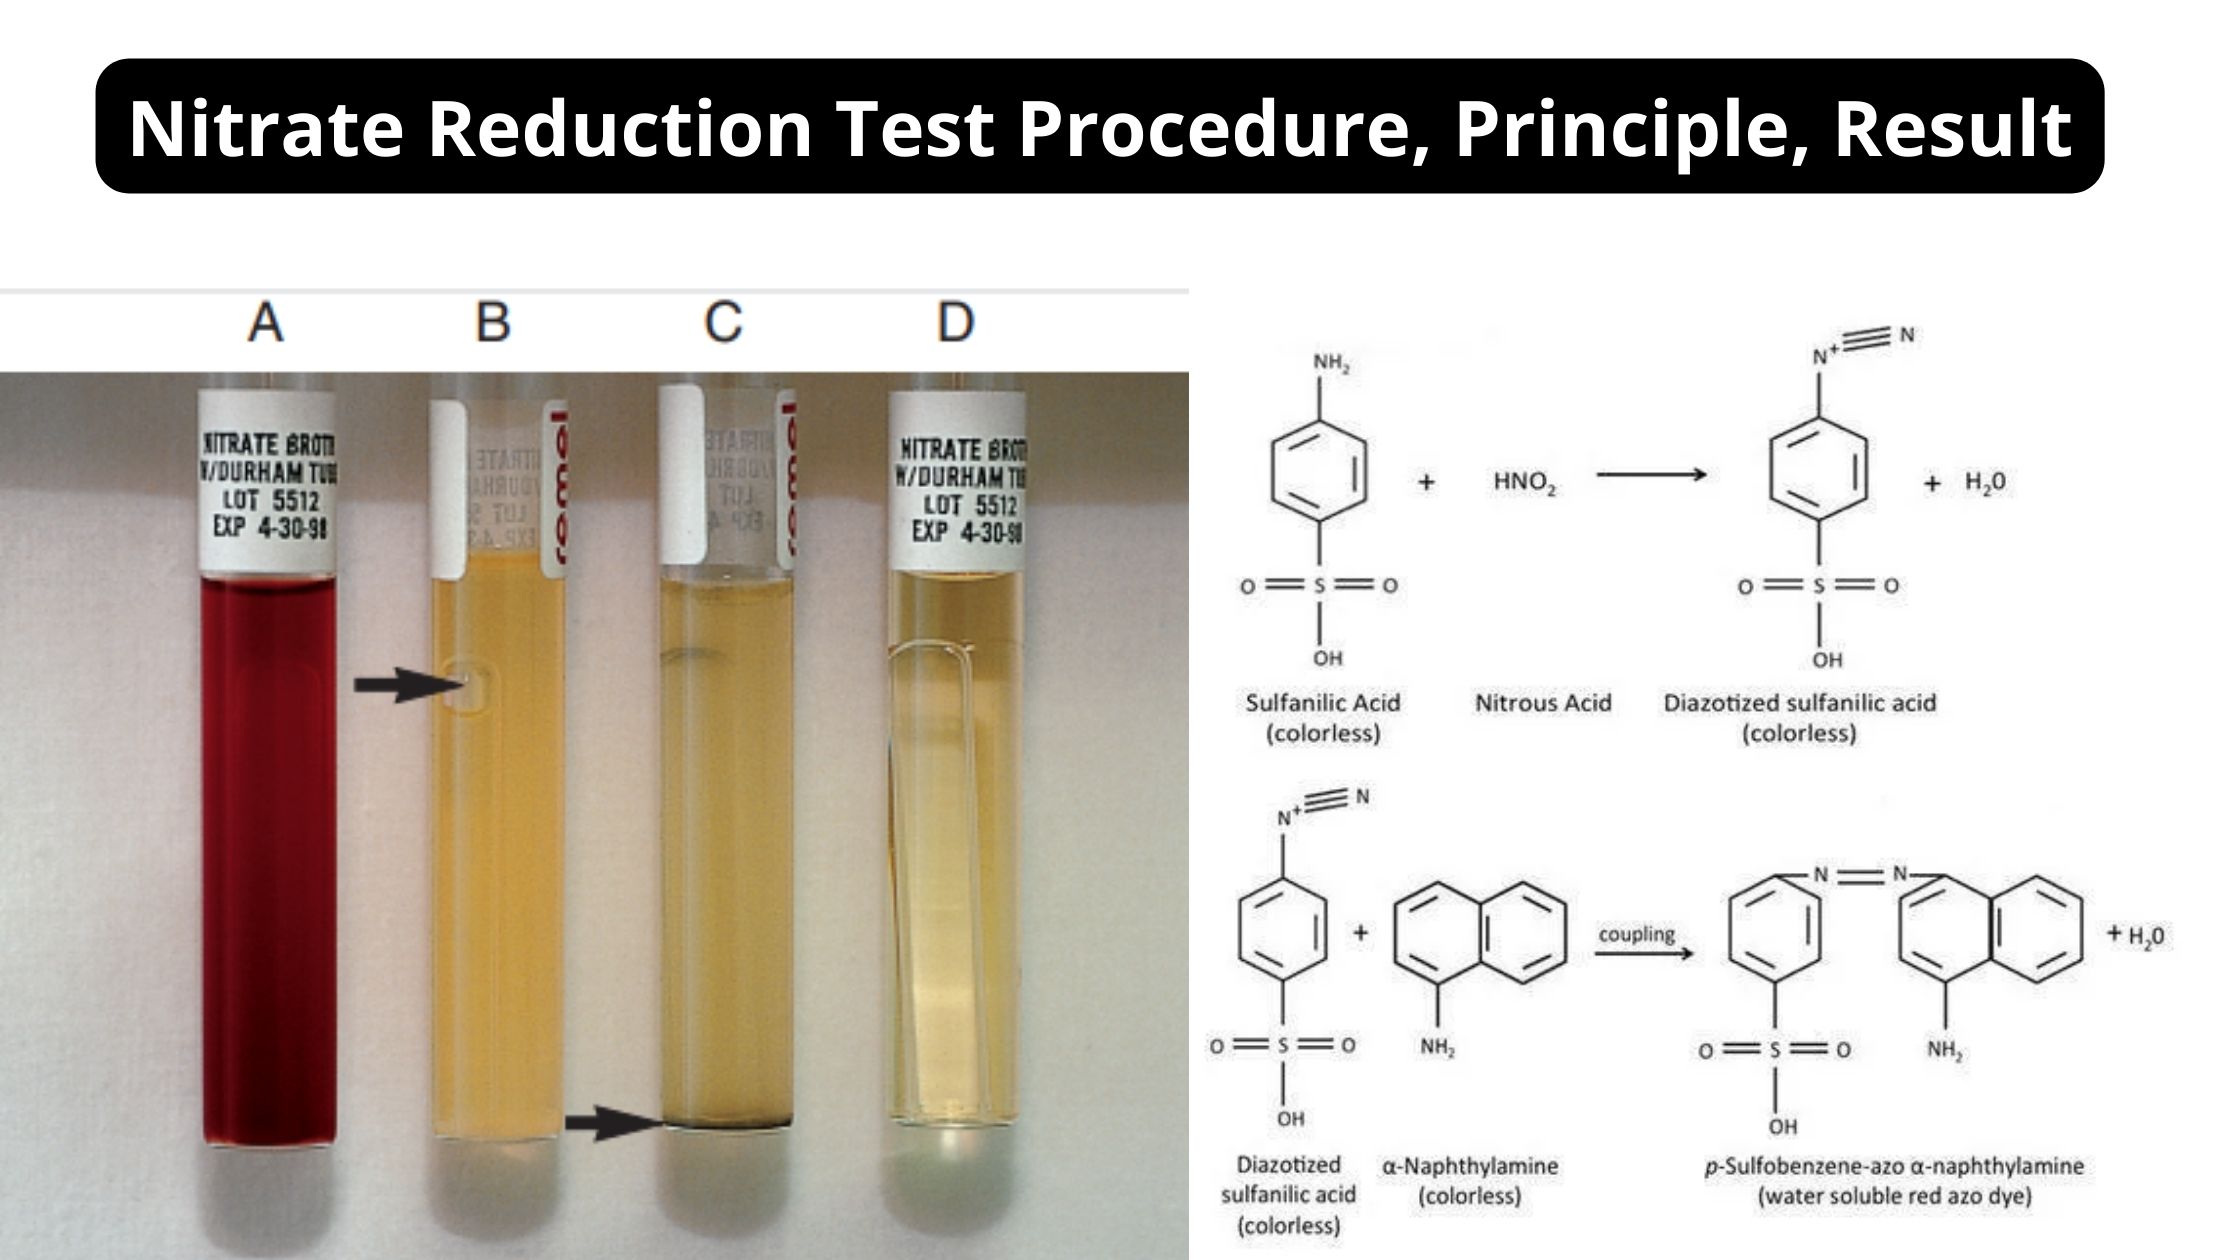 Nitrate Reduction Test Procedure, Principle, Result